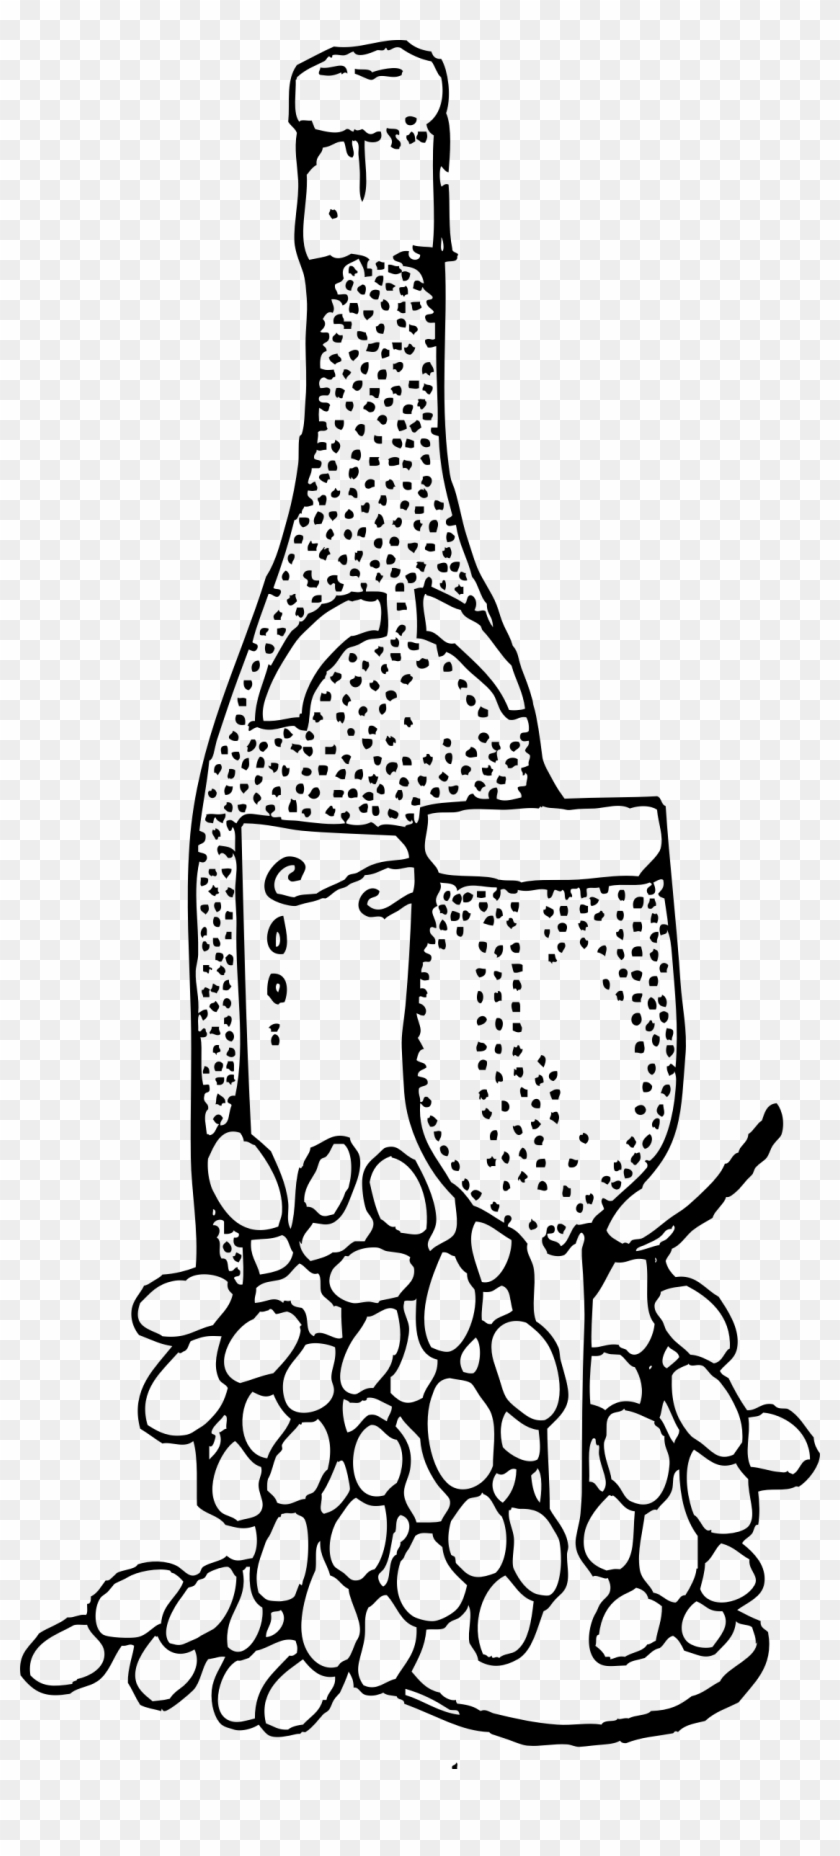 This Free Icons Png Design Of Wine Bottle And Glass Clipart #562454